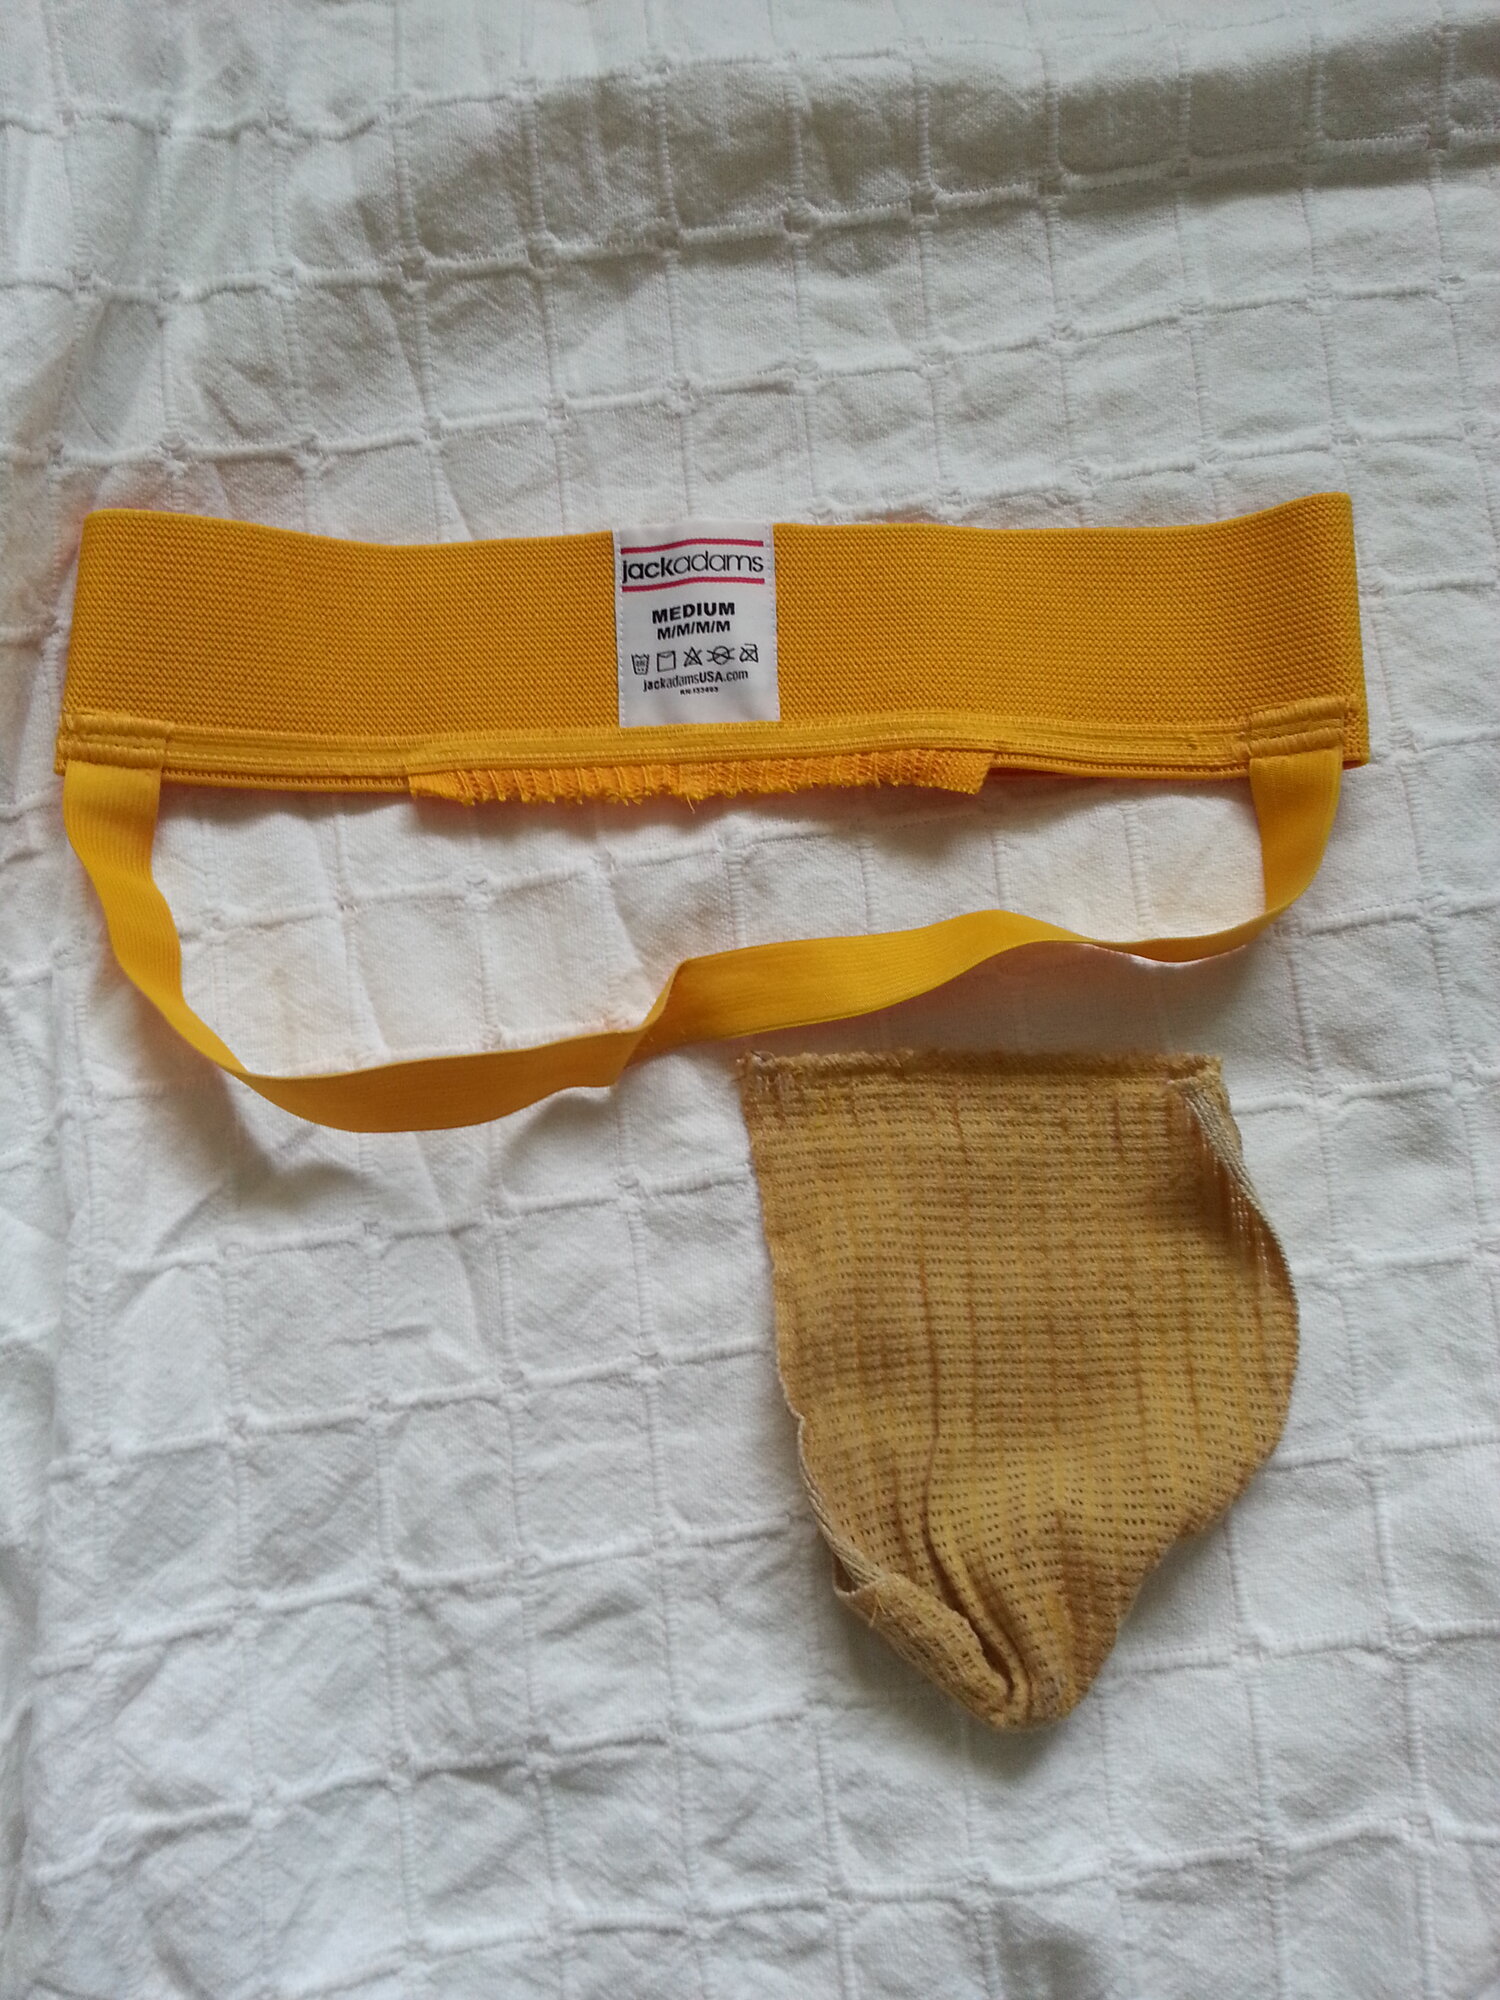 The pouch separate from the jockstrap